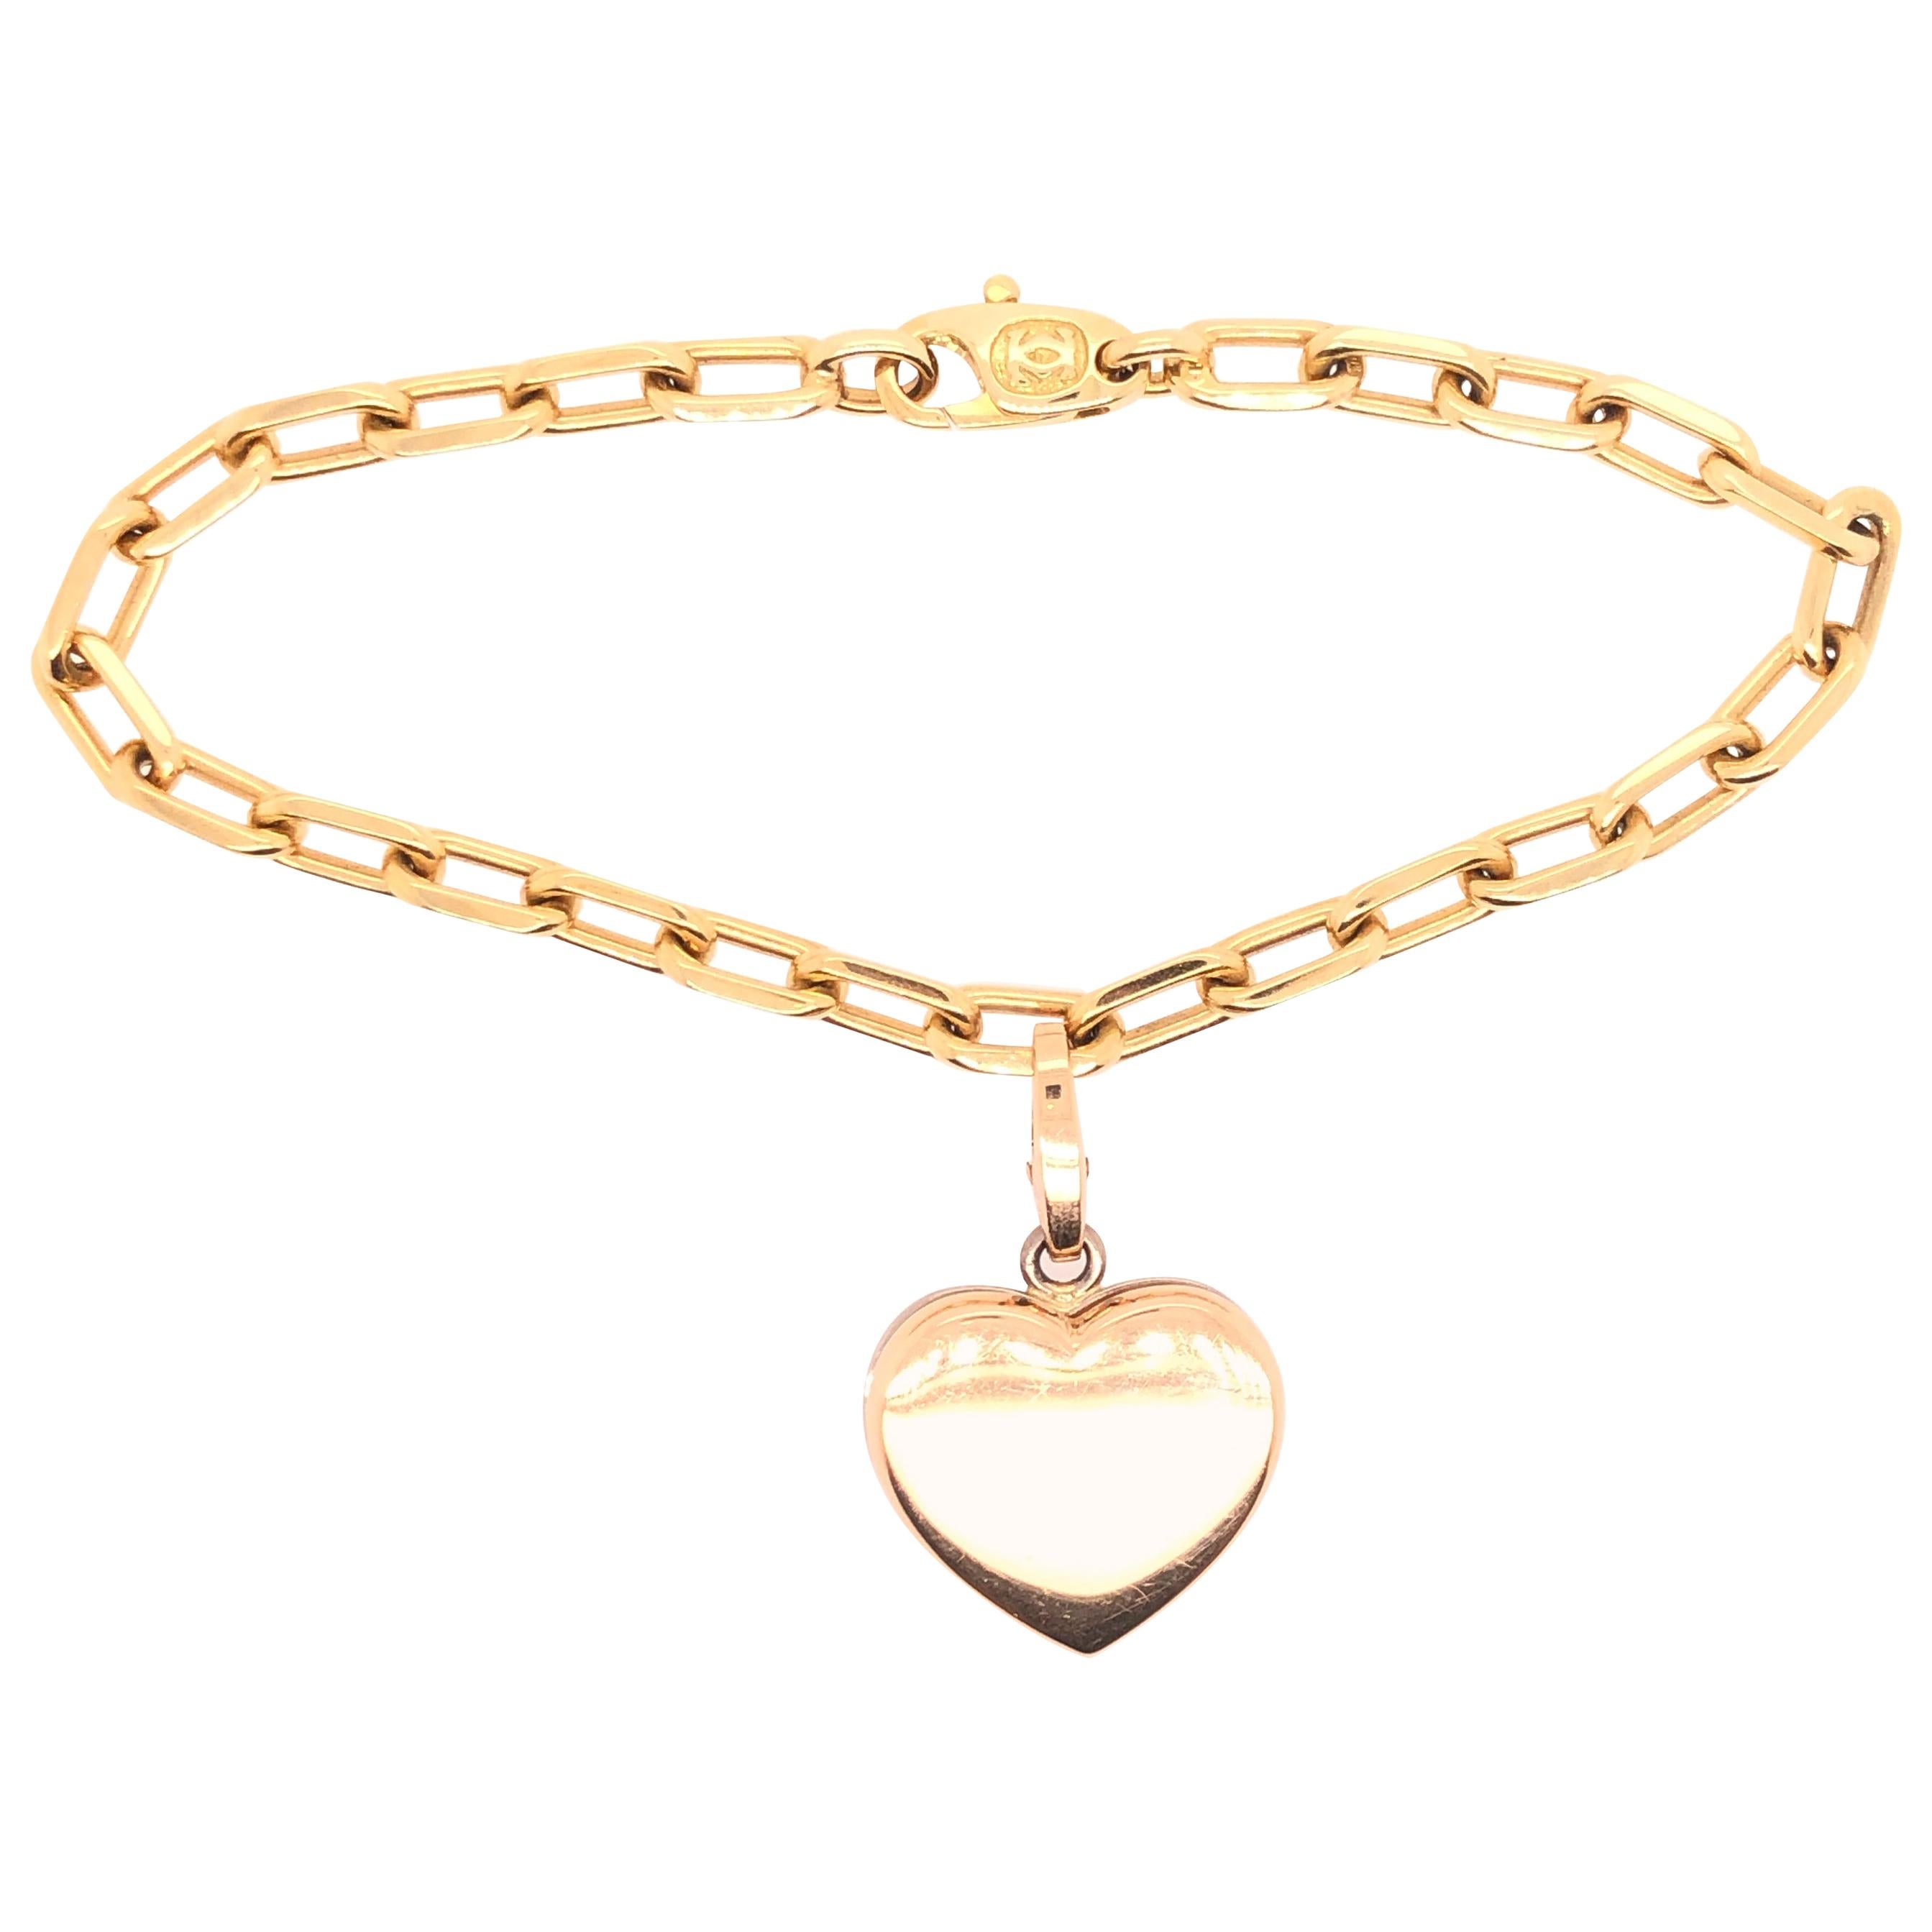 Cartier Yellow and White Gold Heart Charm on Yellow Gold Chain Bracelet